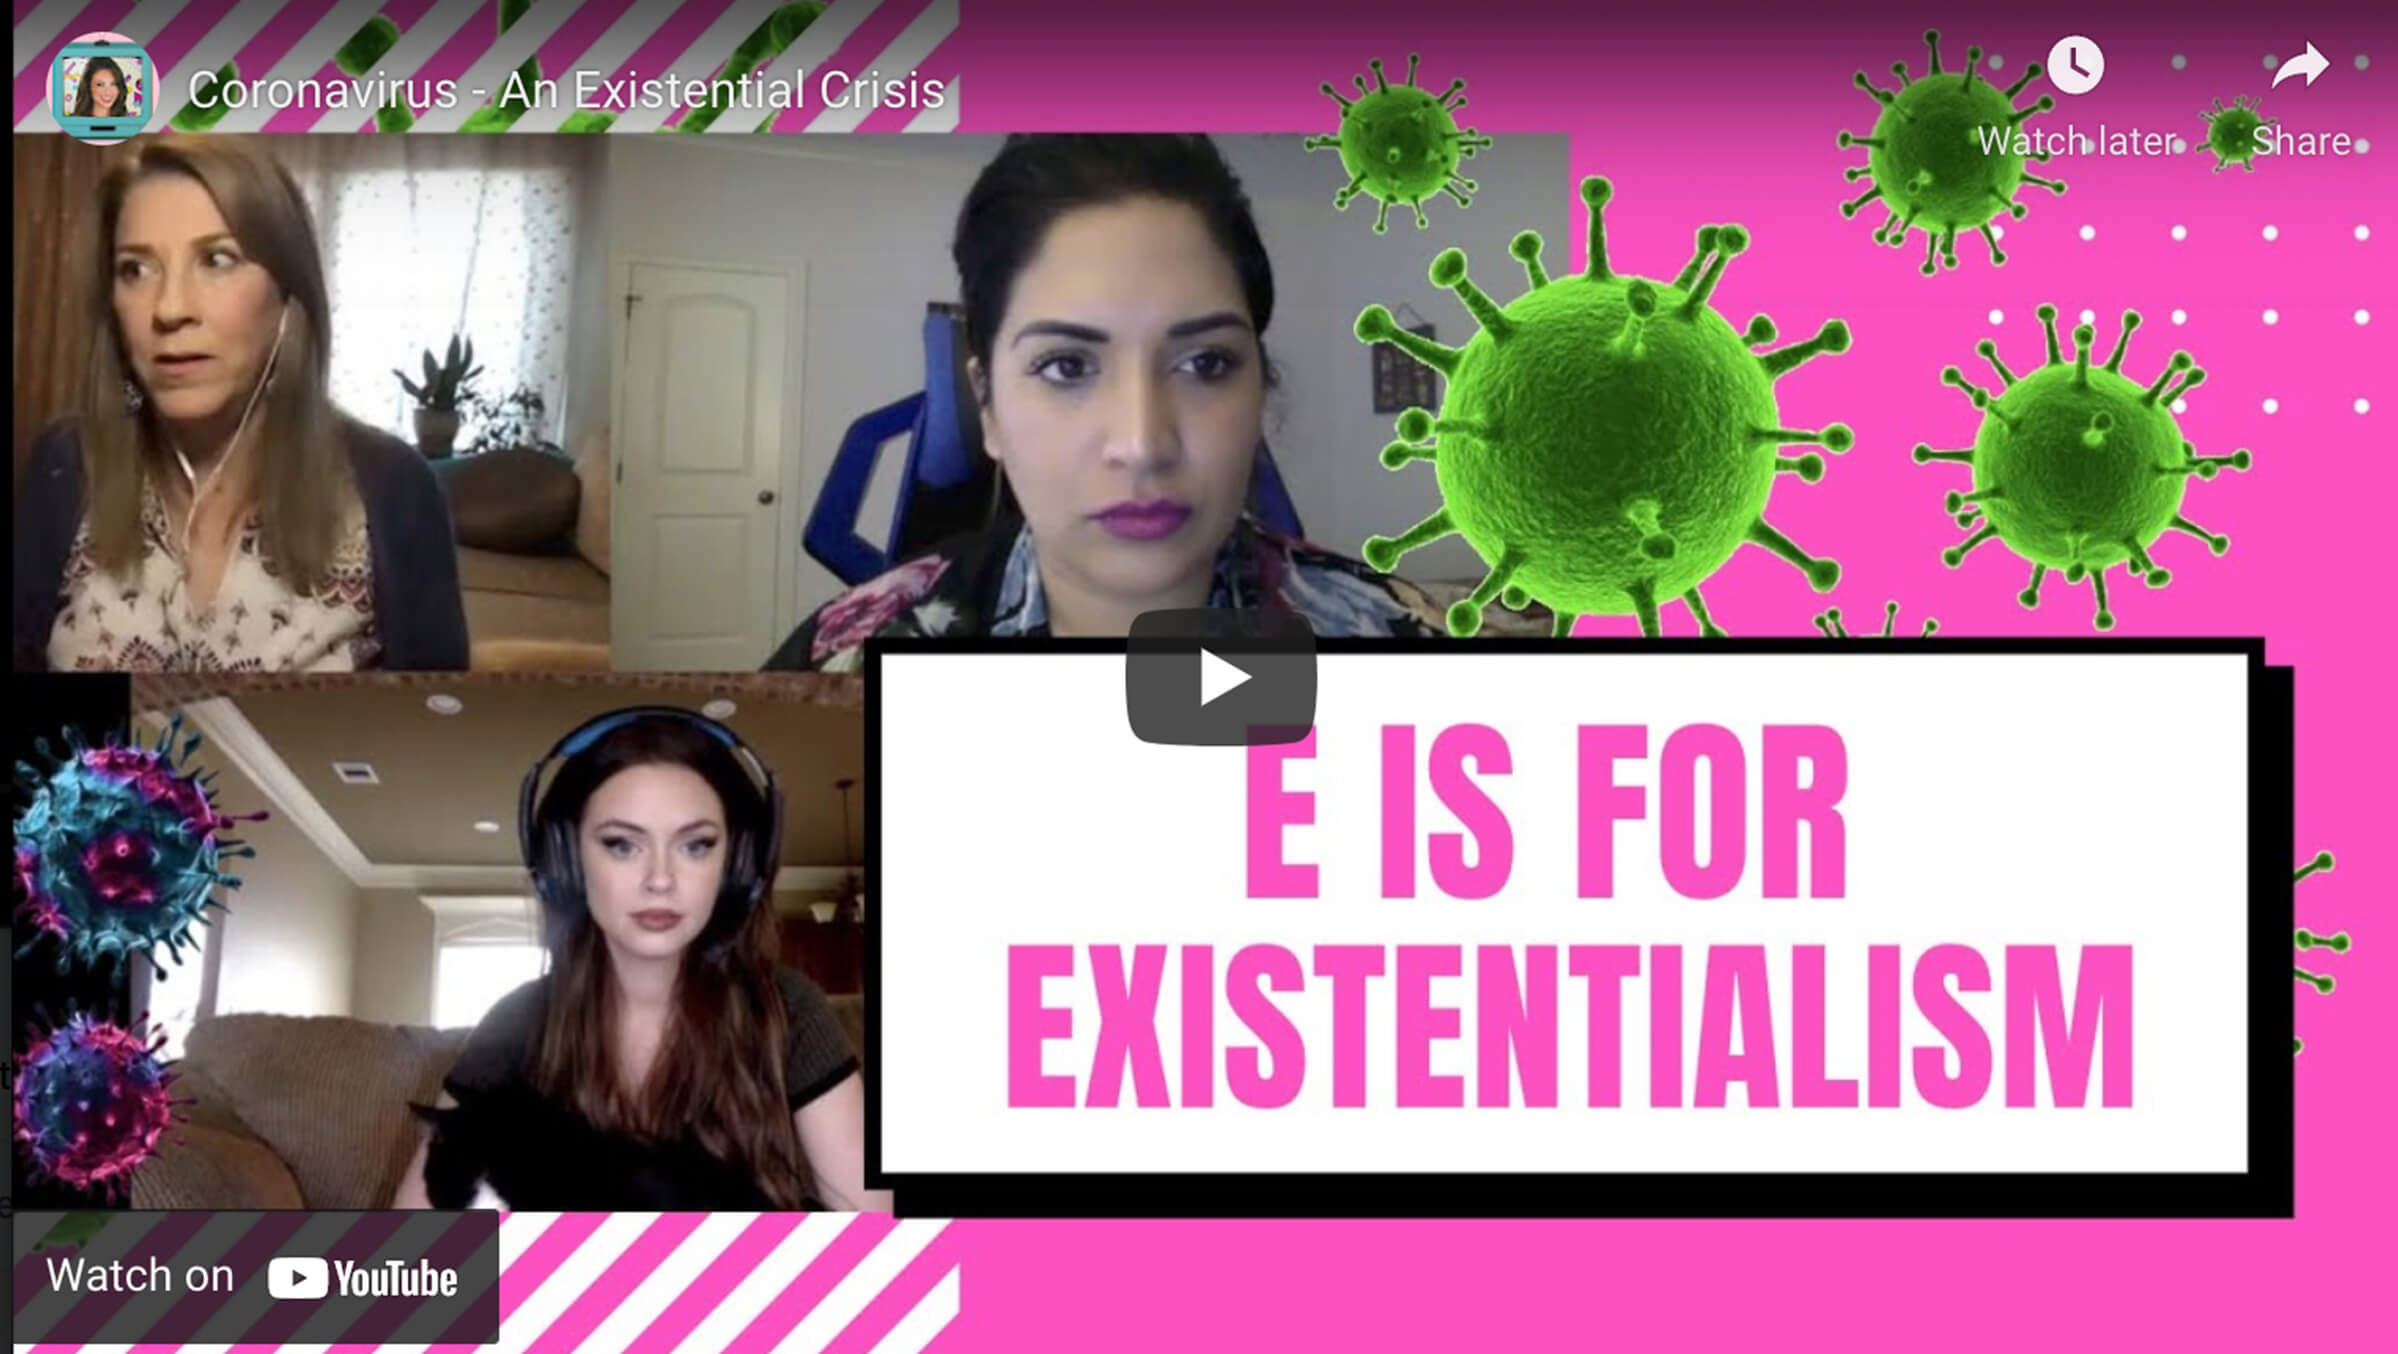 Featured image for “E is for Existentialism”